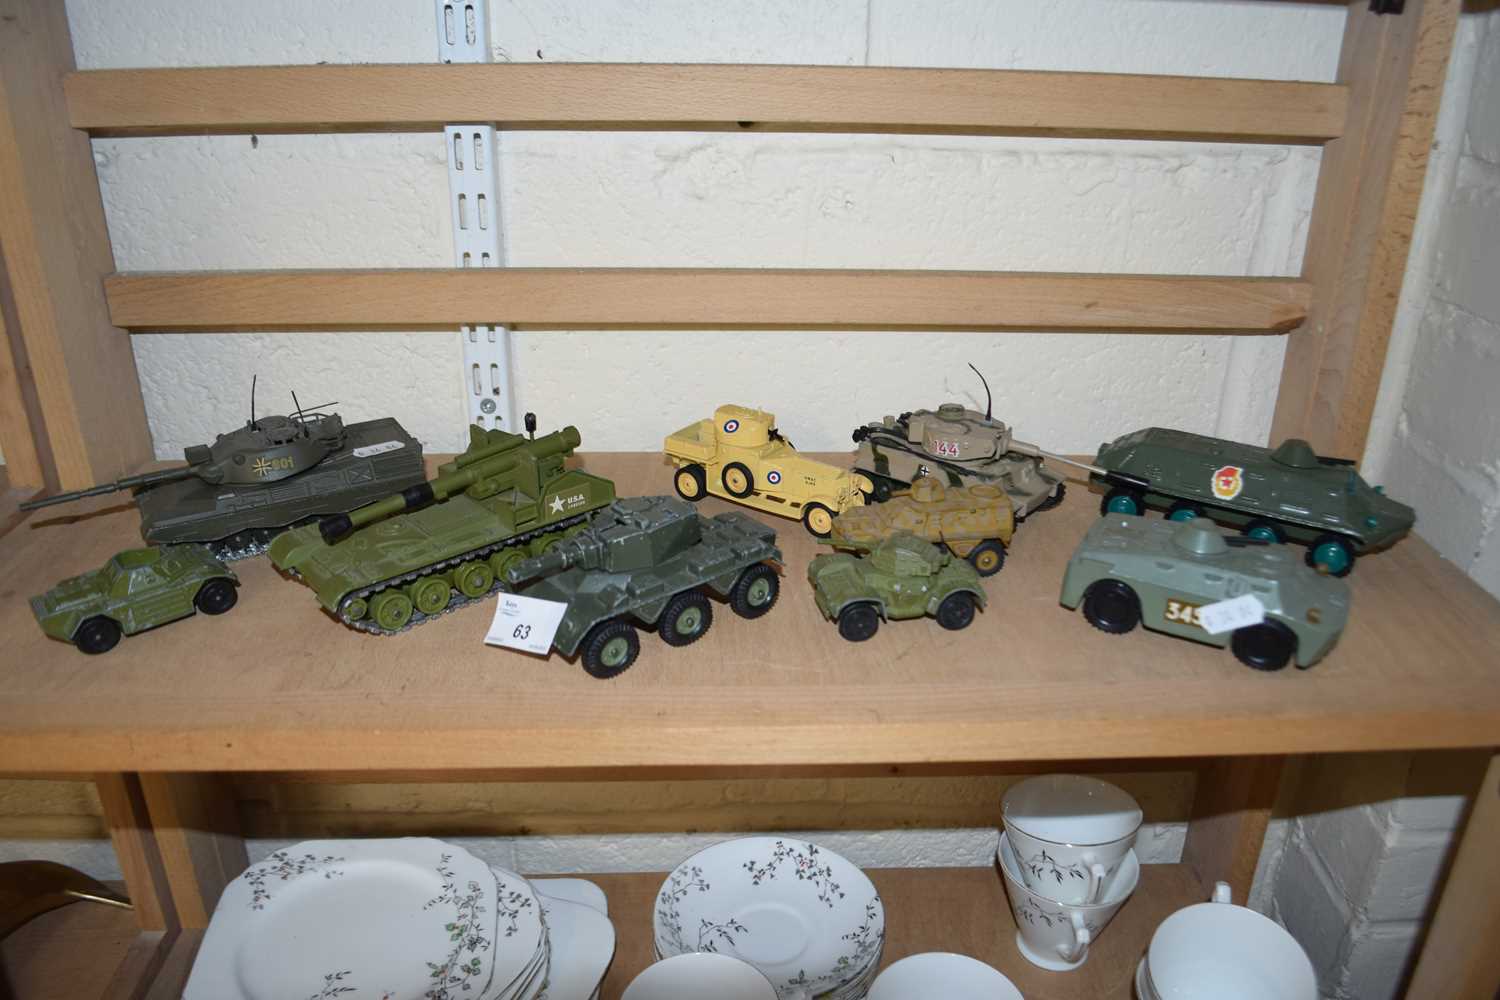 A COLLECTION OF DYE CAST AND OTHER TOY MILITARY VEHICLES TO INCLUDE DINKY